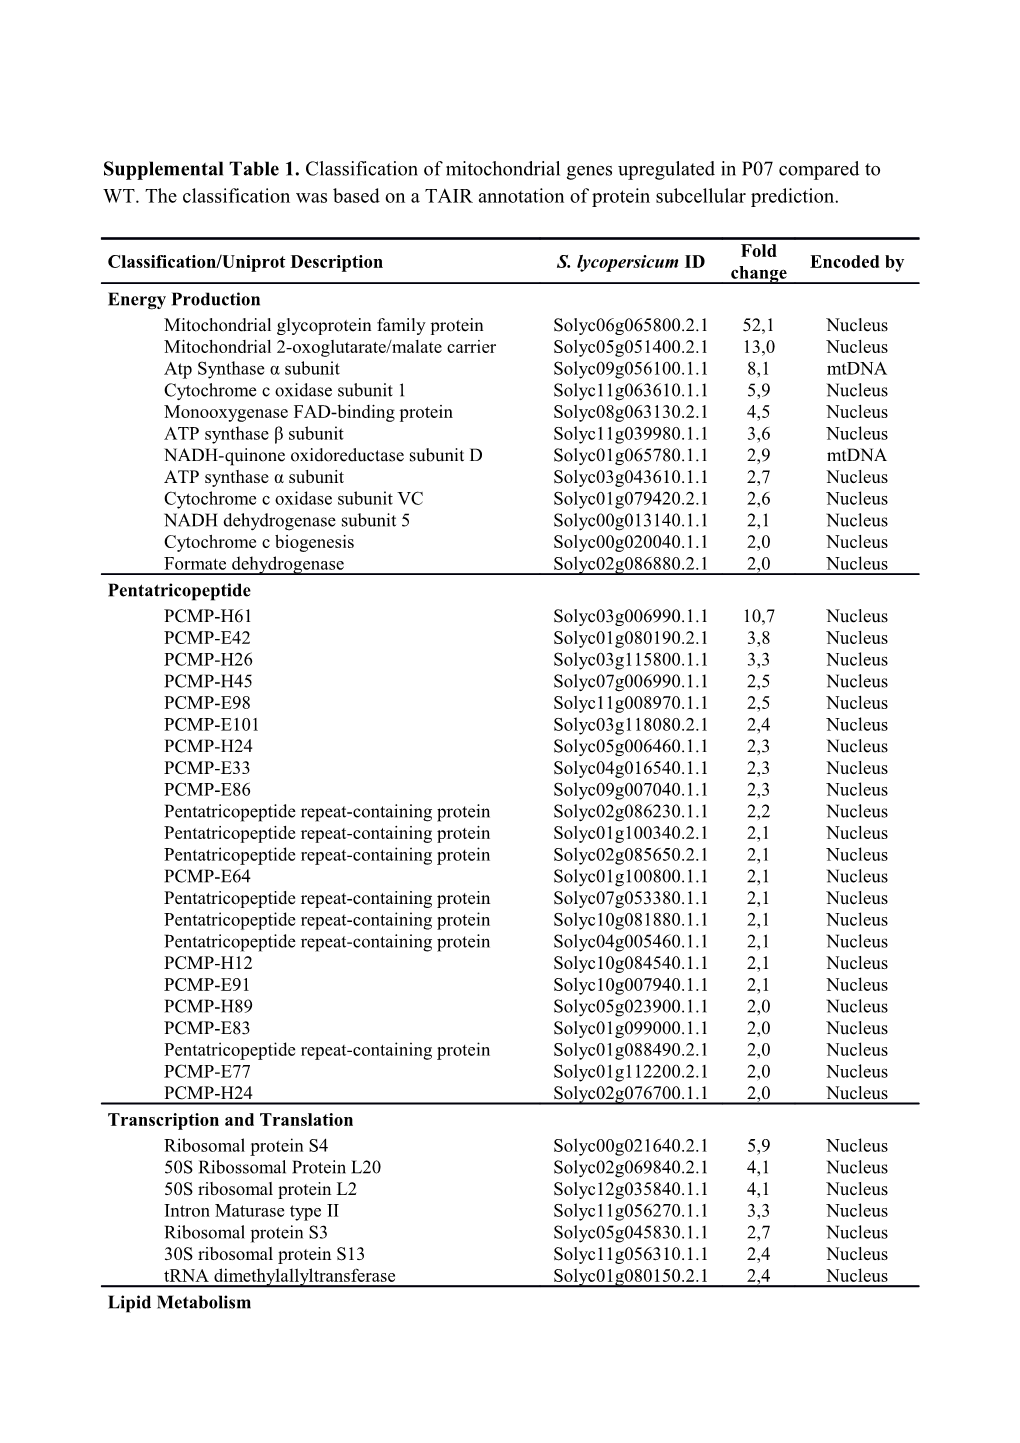 Supplemental Table 1. Classification of Mitochondrial Genes Upregulated in P07 Compared